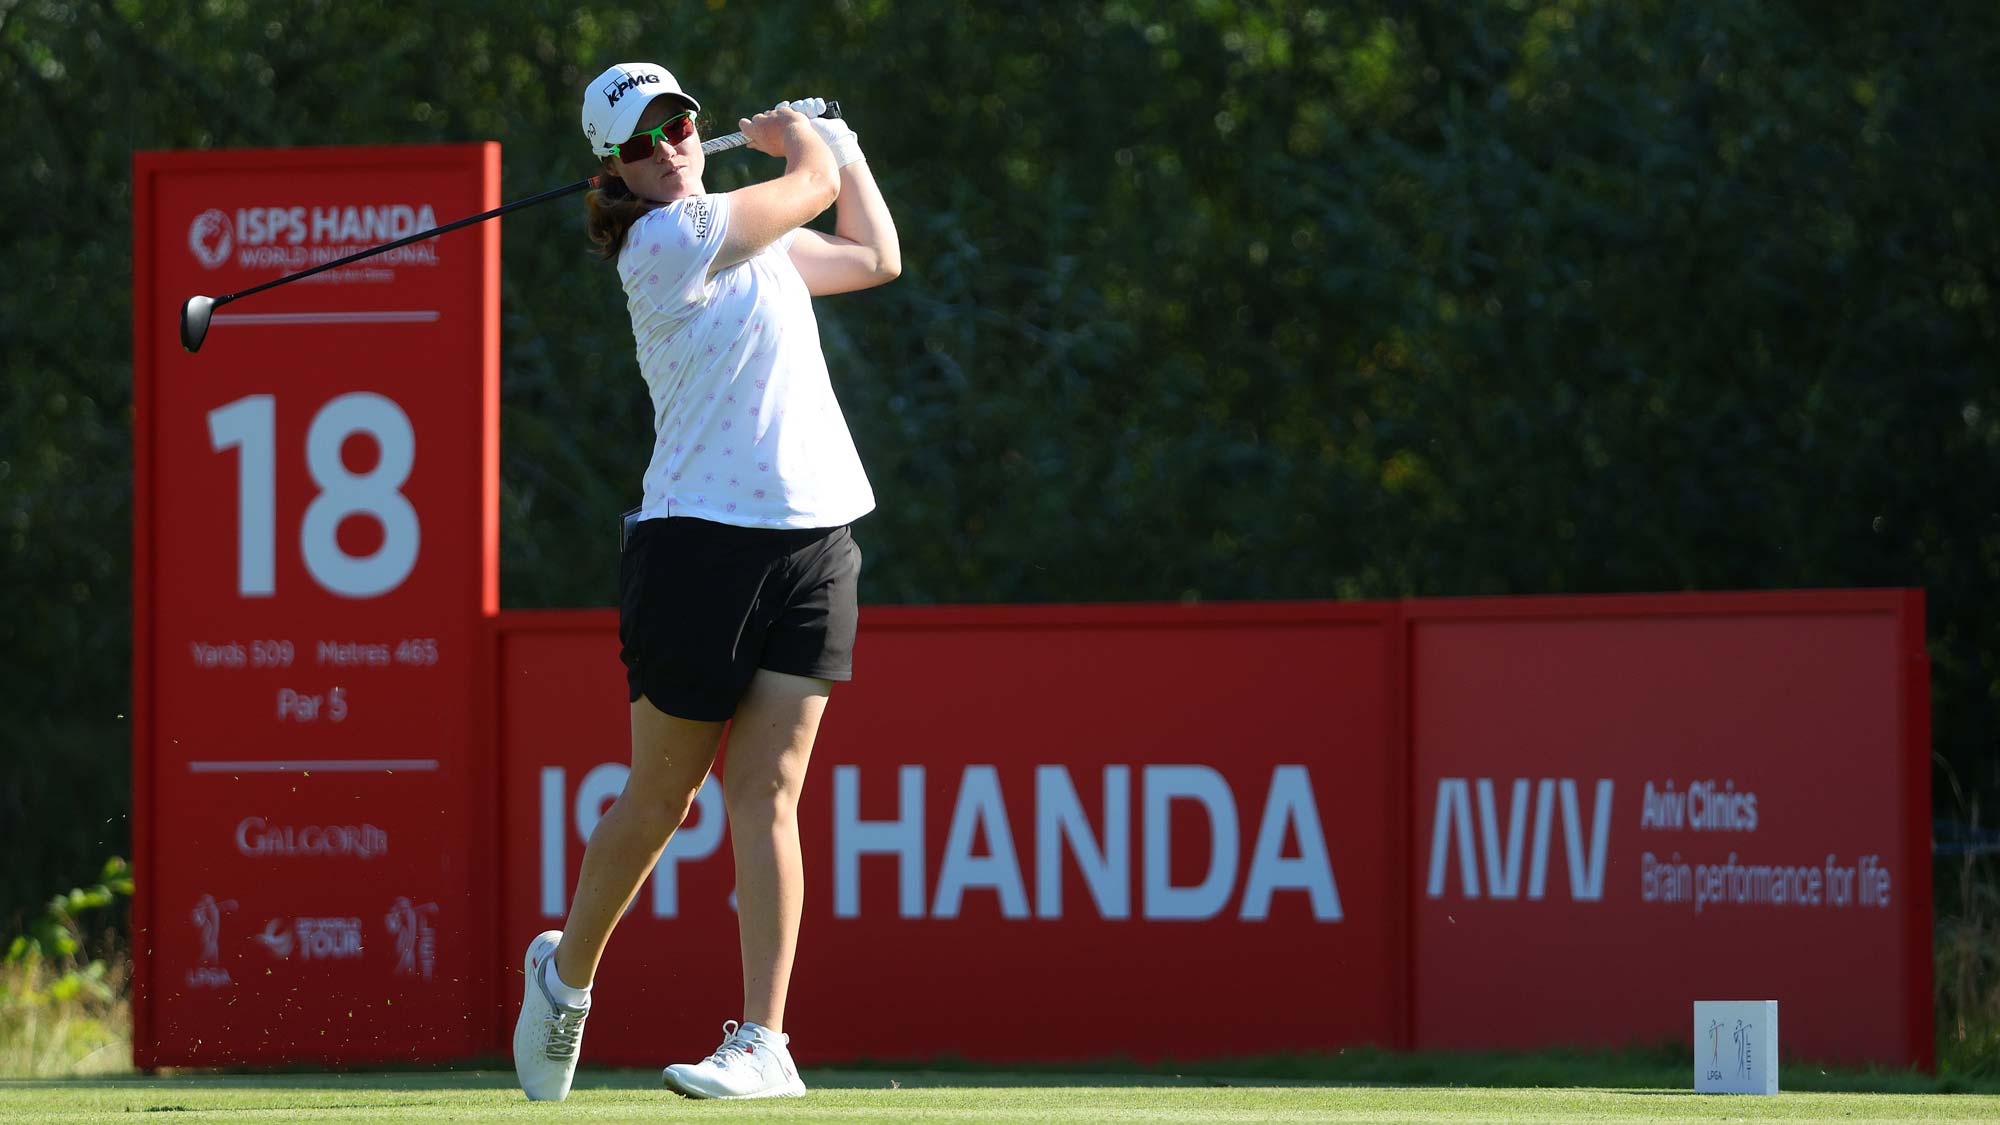 Leona Maguire of Ireland tees off on the 18th hole during Day Three of the ISPS Handa World Invitational presented by AVIV Clinics